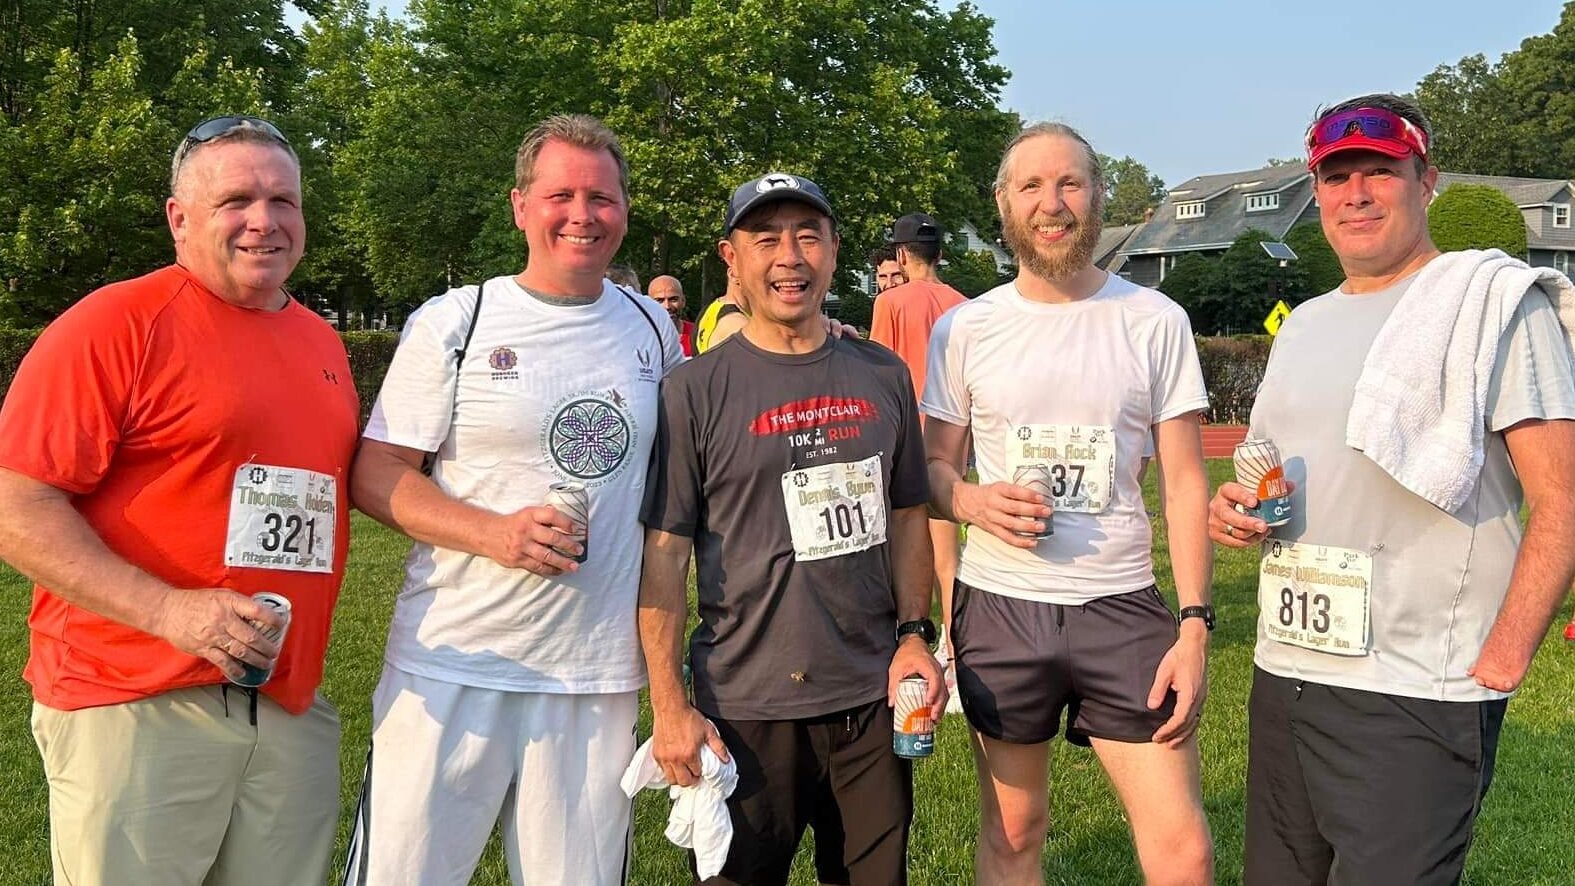 Me and the running buddies, after the finish. Happier after a beer,